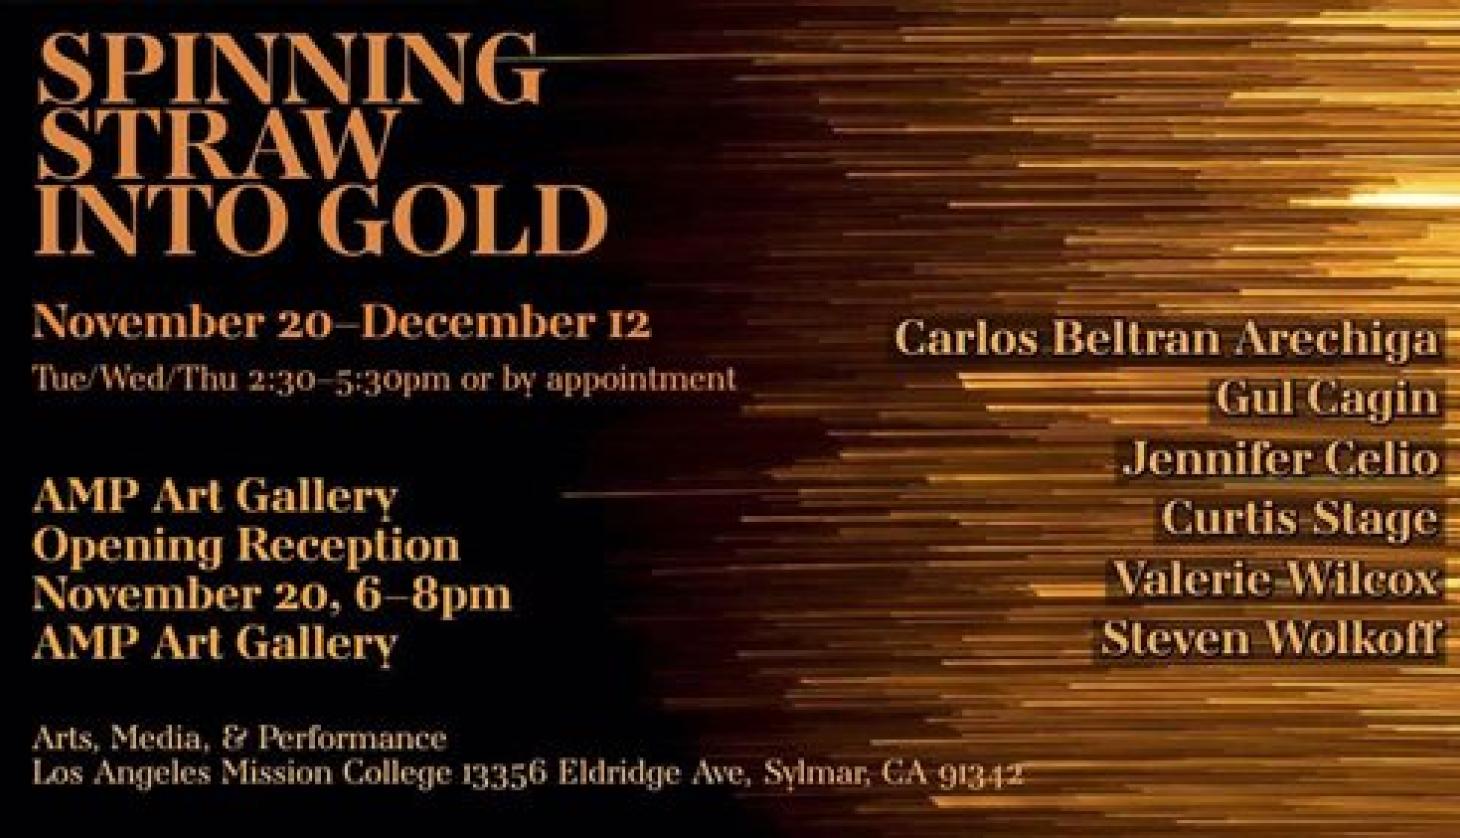 Spinning Straw Into Gold Flyer Info